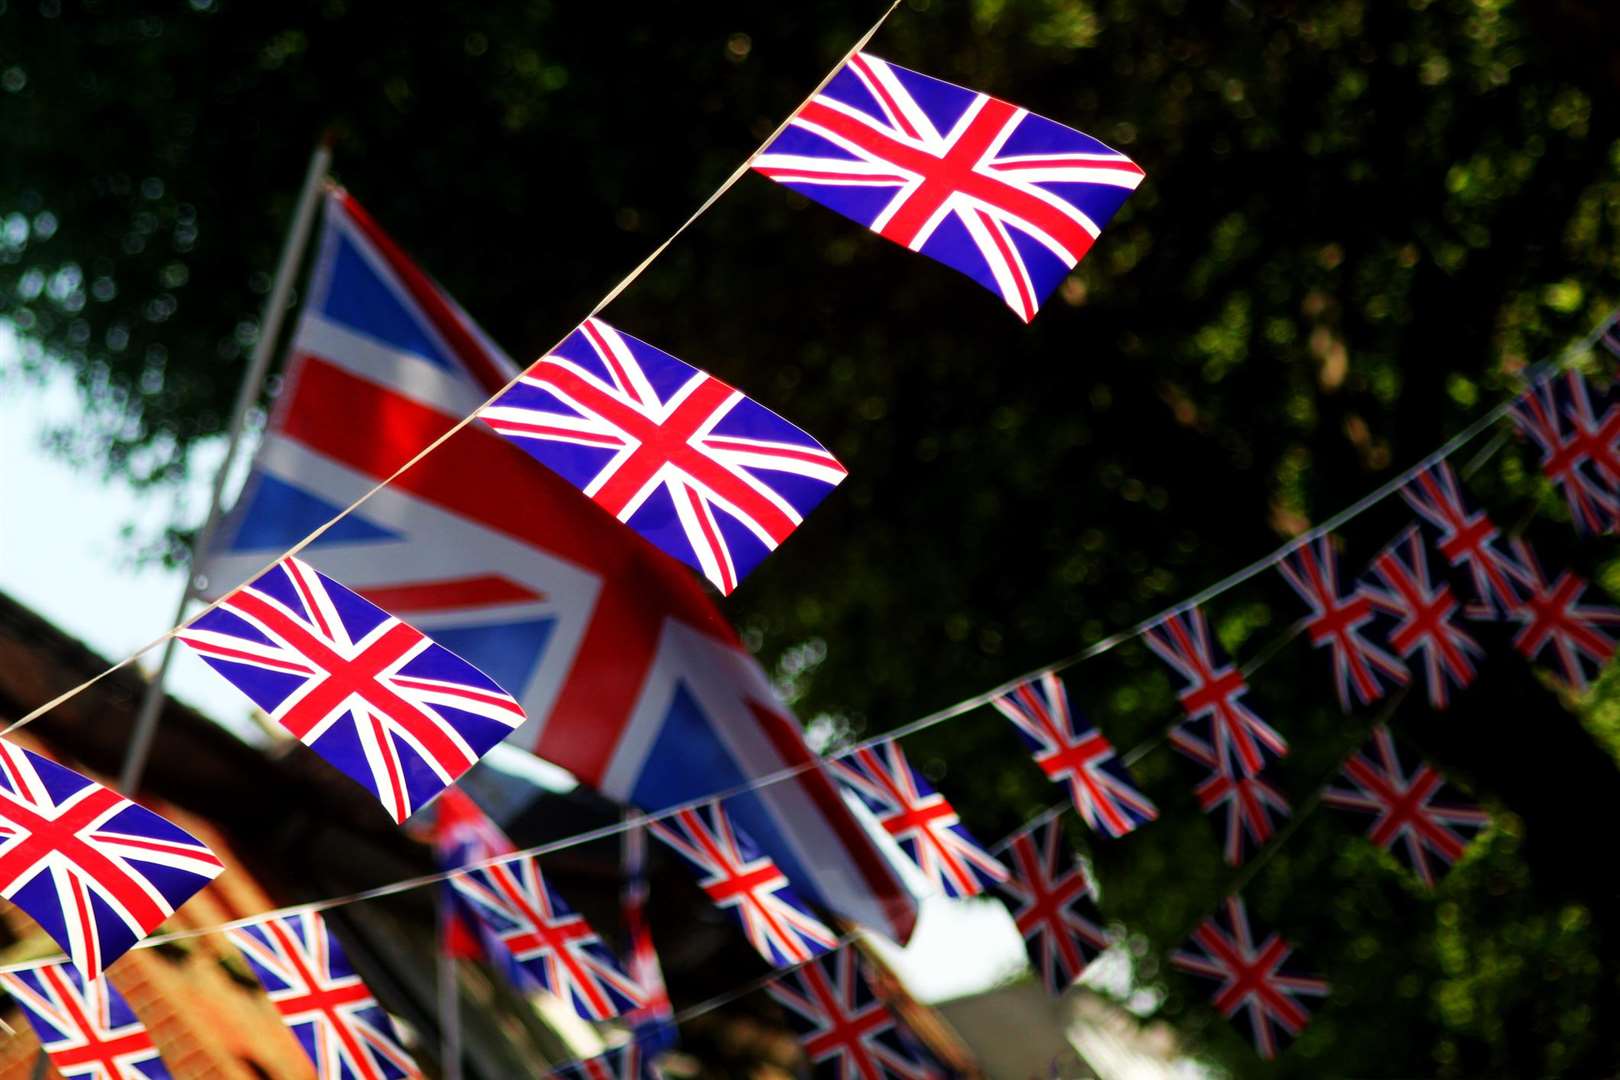 Get the bunting out for Harry and Meghan - or is that you?